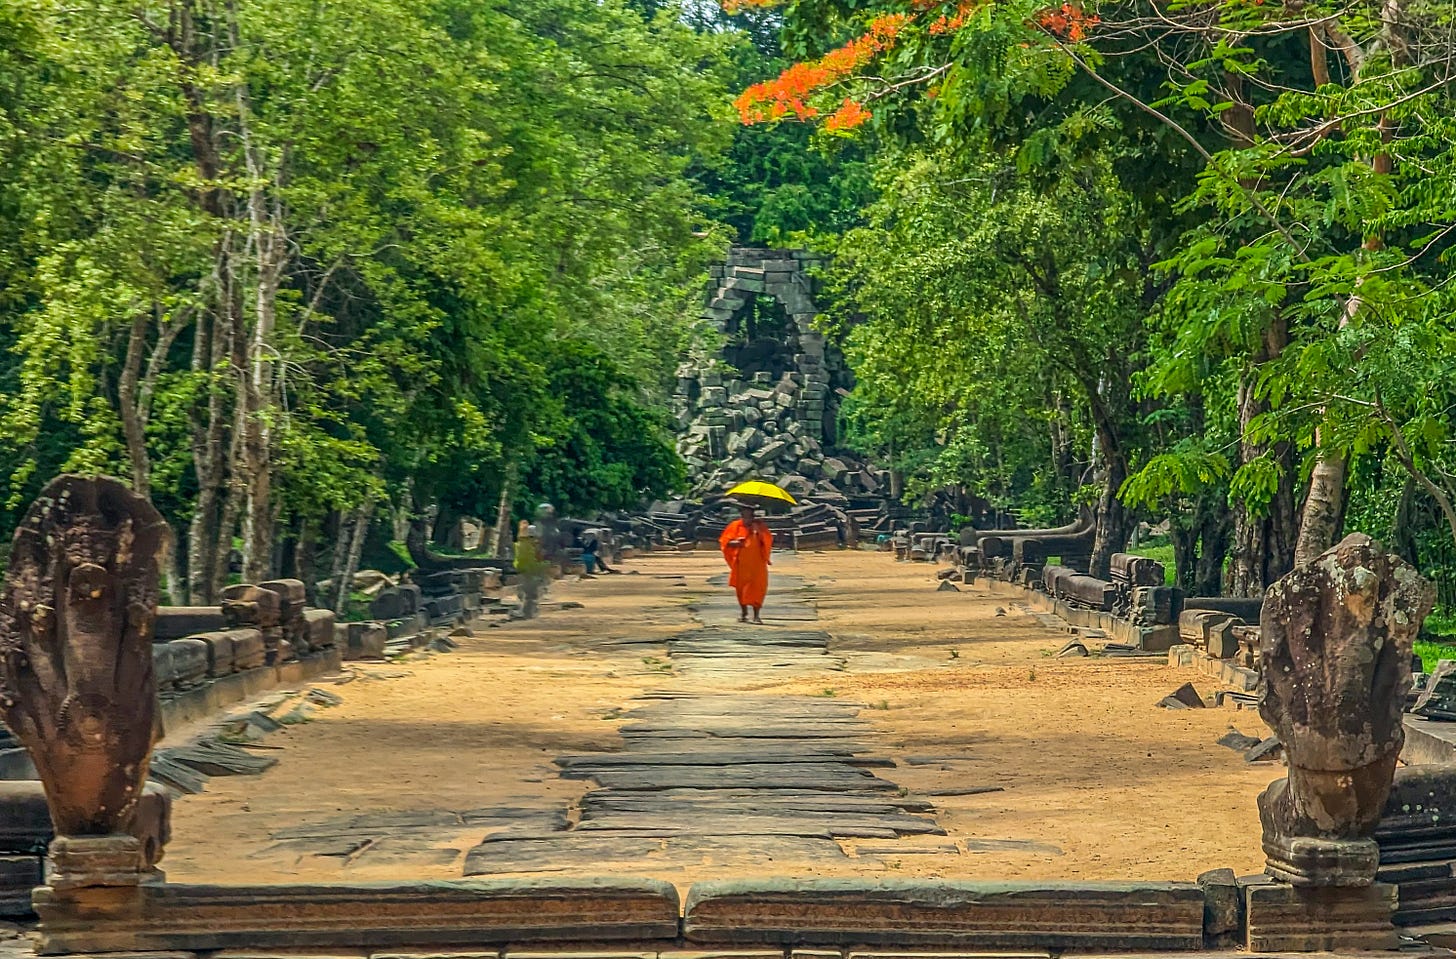 Photo of a ruined plaza in an Angkor Wat temple. A long entryway is surrounded by trees, a monk wearing an orange robe and holding a yellow umbrella is in the distance walking toward the camera. 